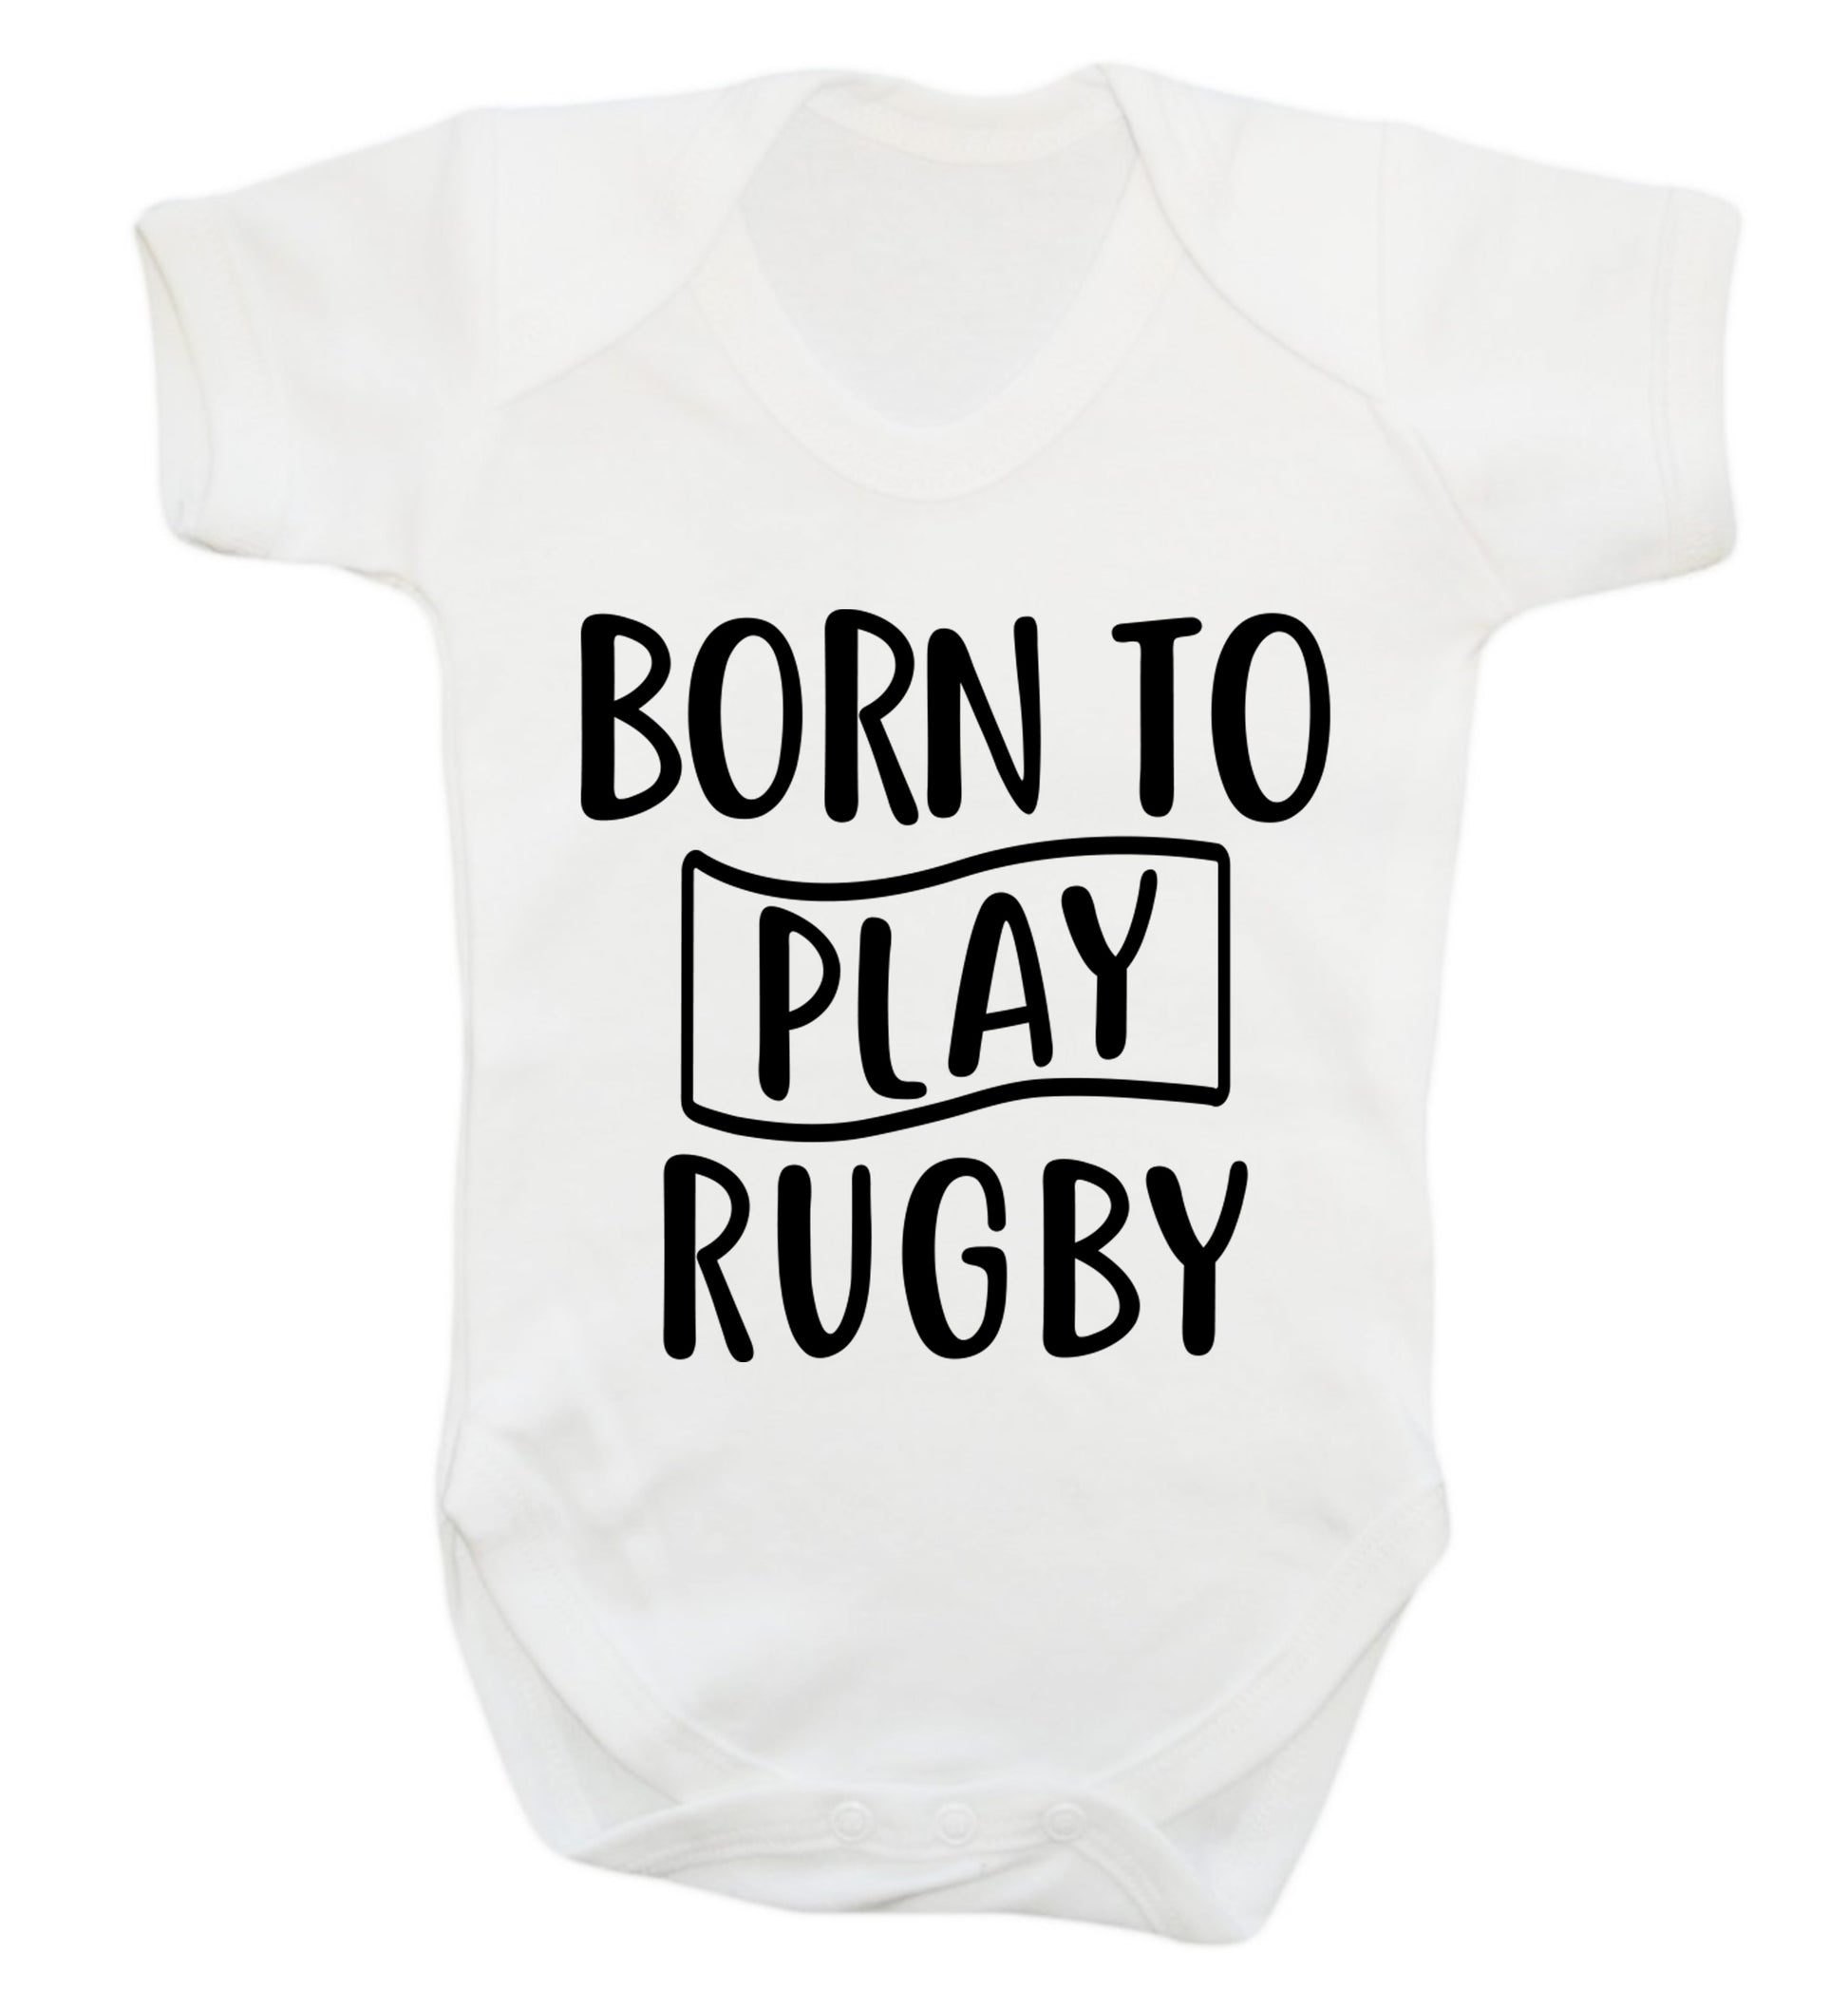 Born to play rugby Baby Vest white 18-24 months